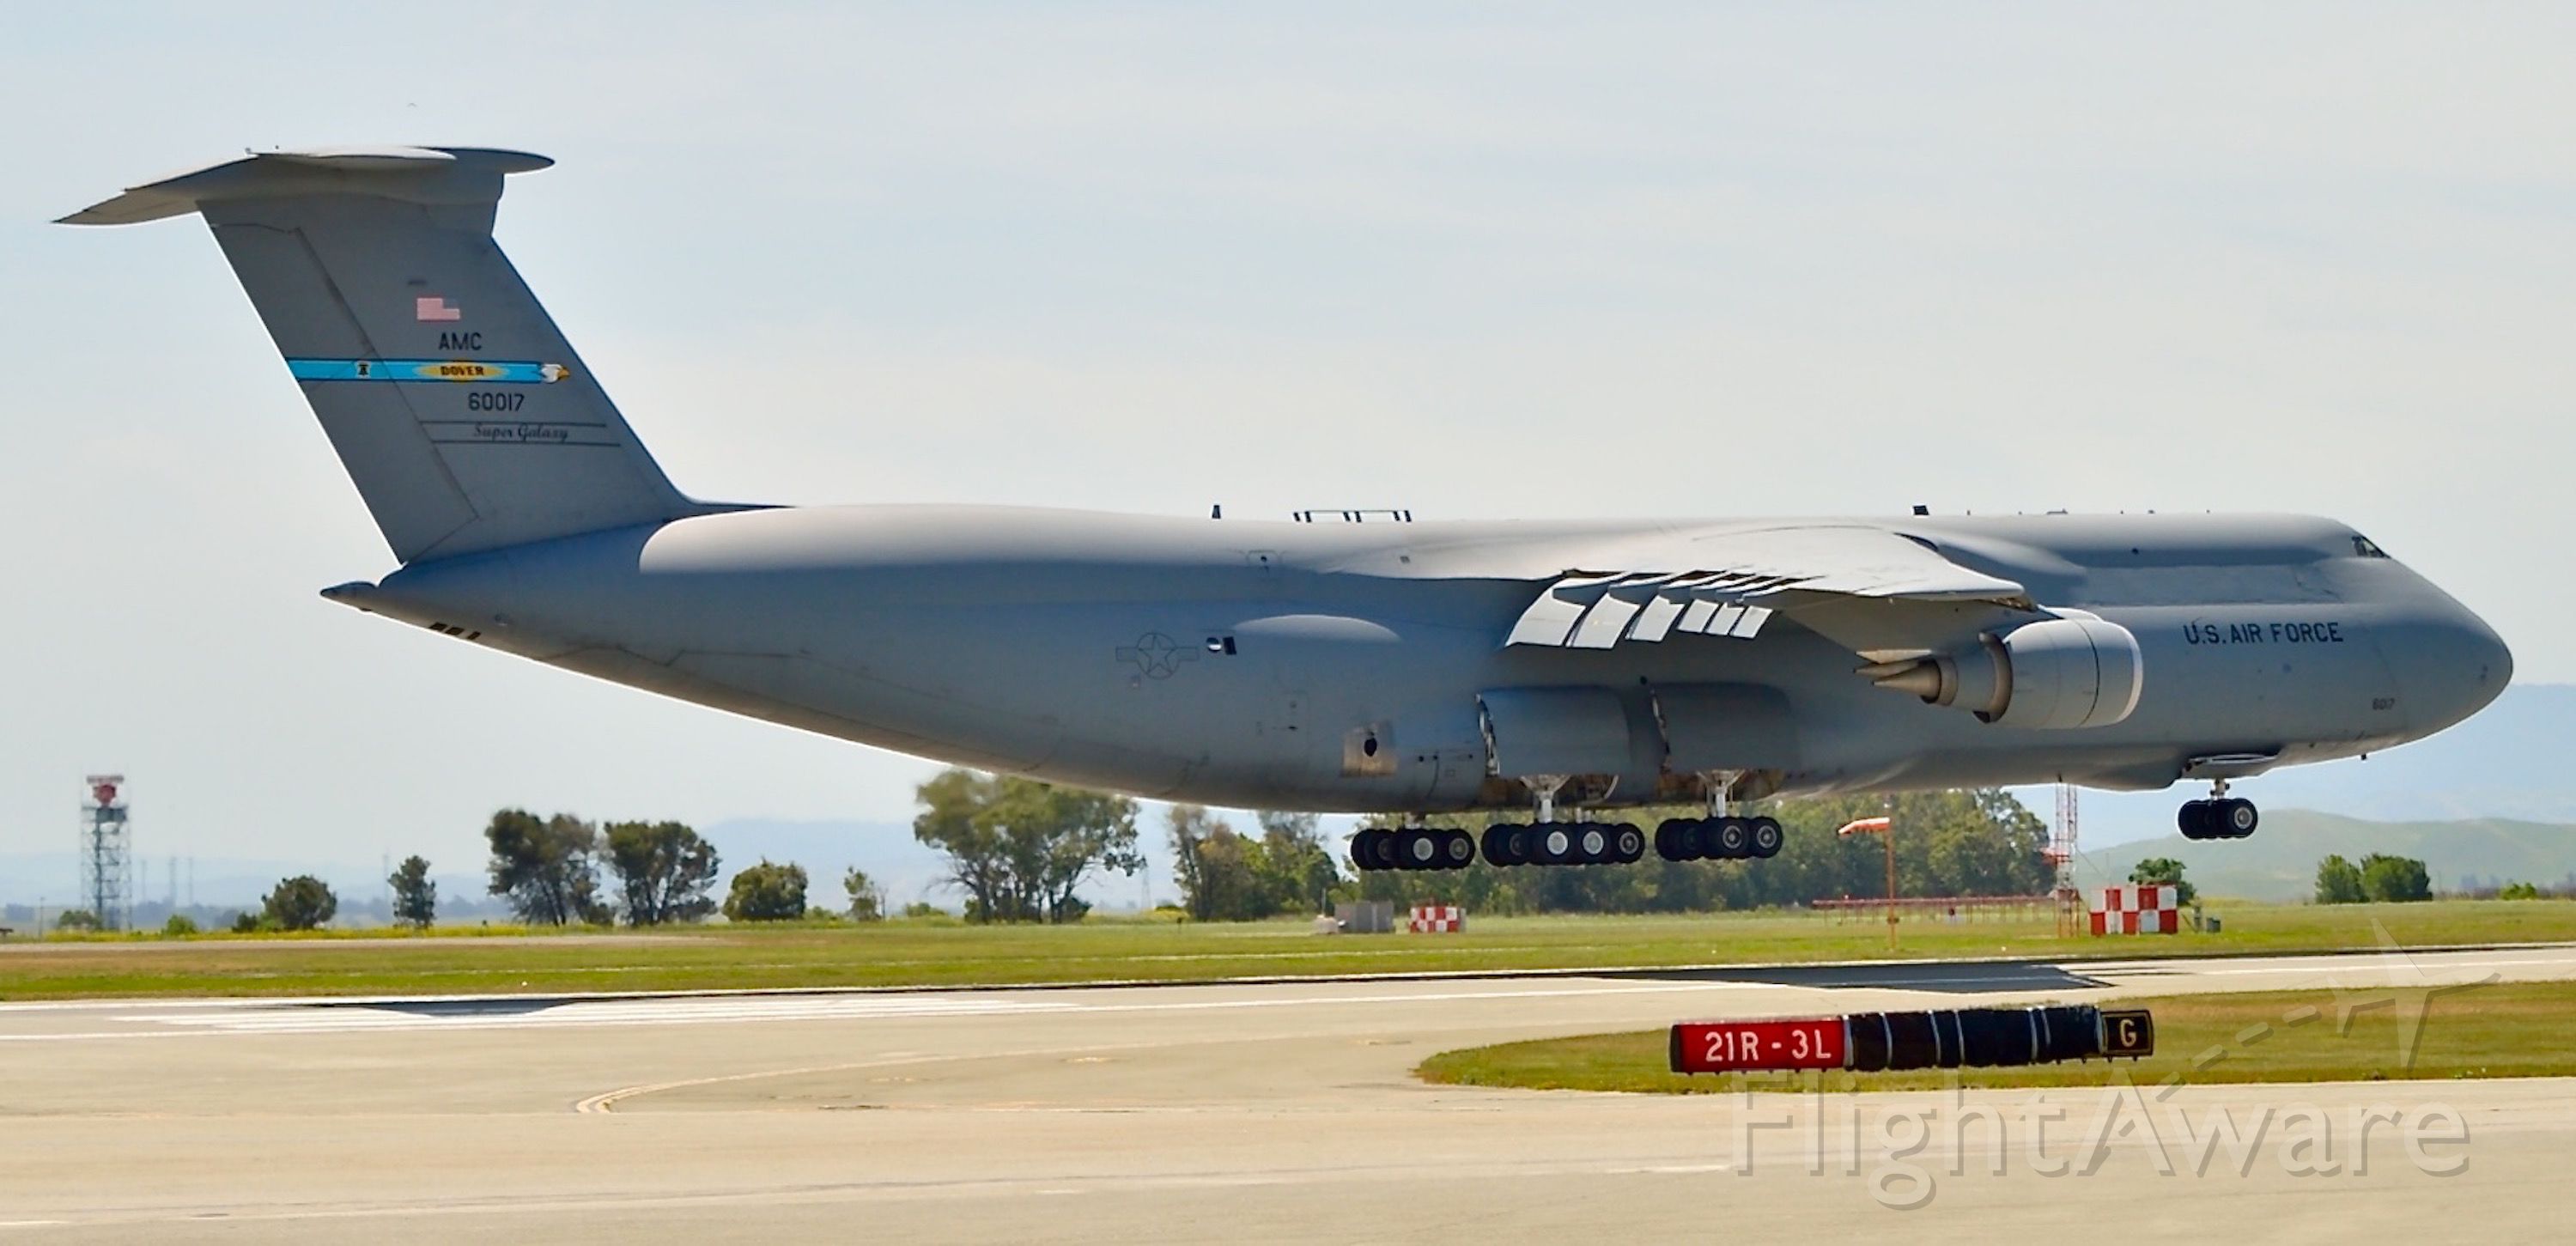 N60017 — - Arrival of a Dover AFB  C-5M "Super Galaxy" in 2014 at Travis AFB.  The C-5 was transferred to Travis from Dover.